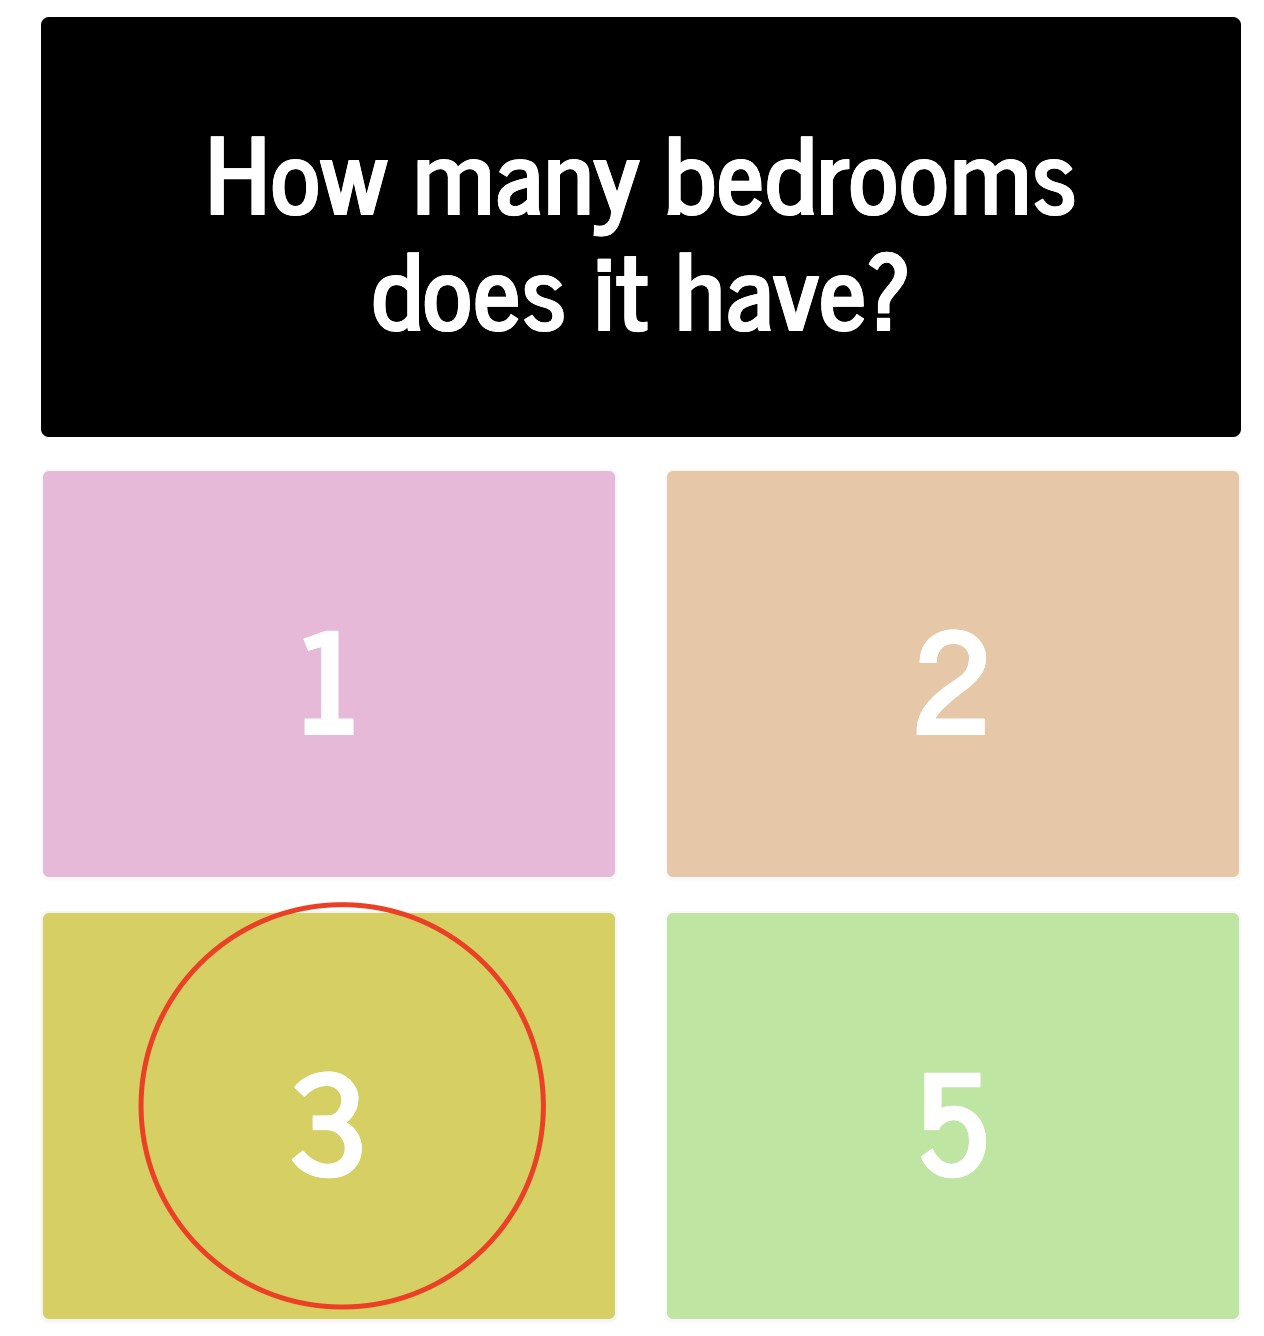 A question asking how many bedrooms it has